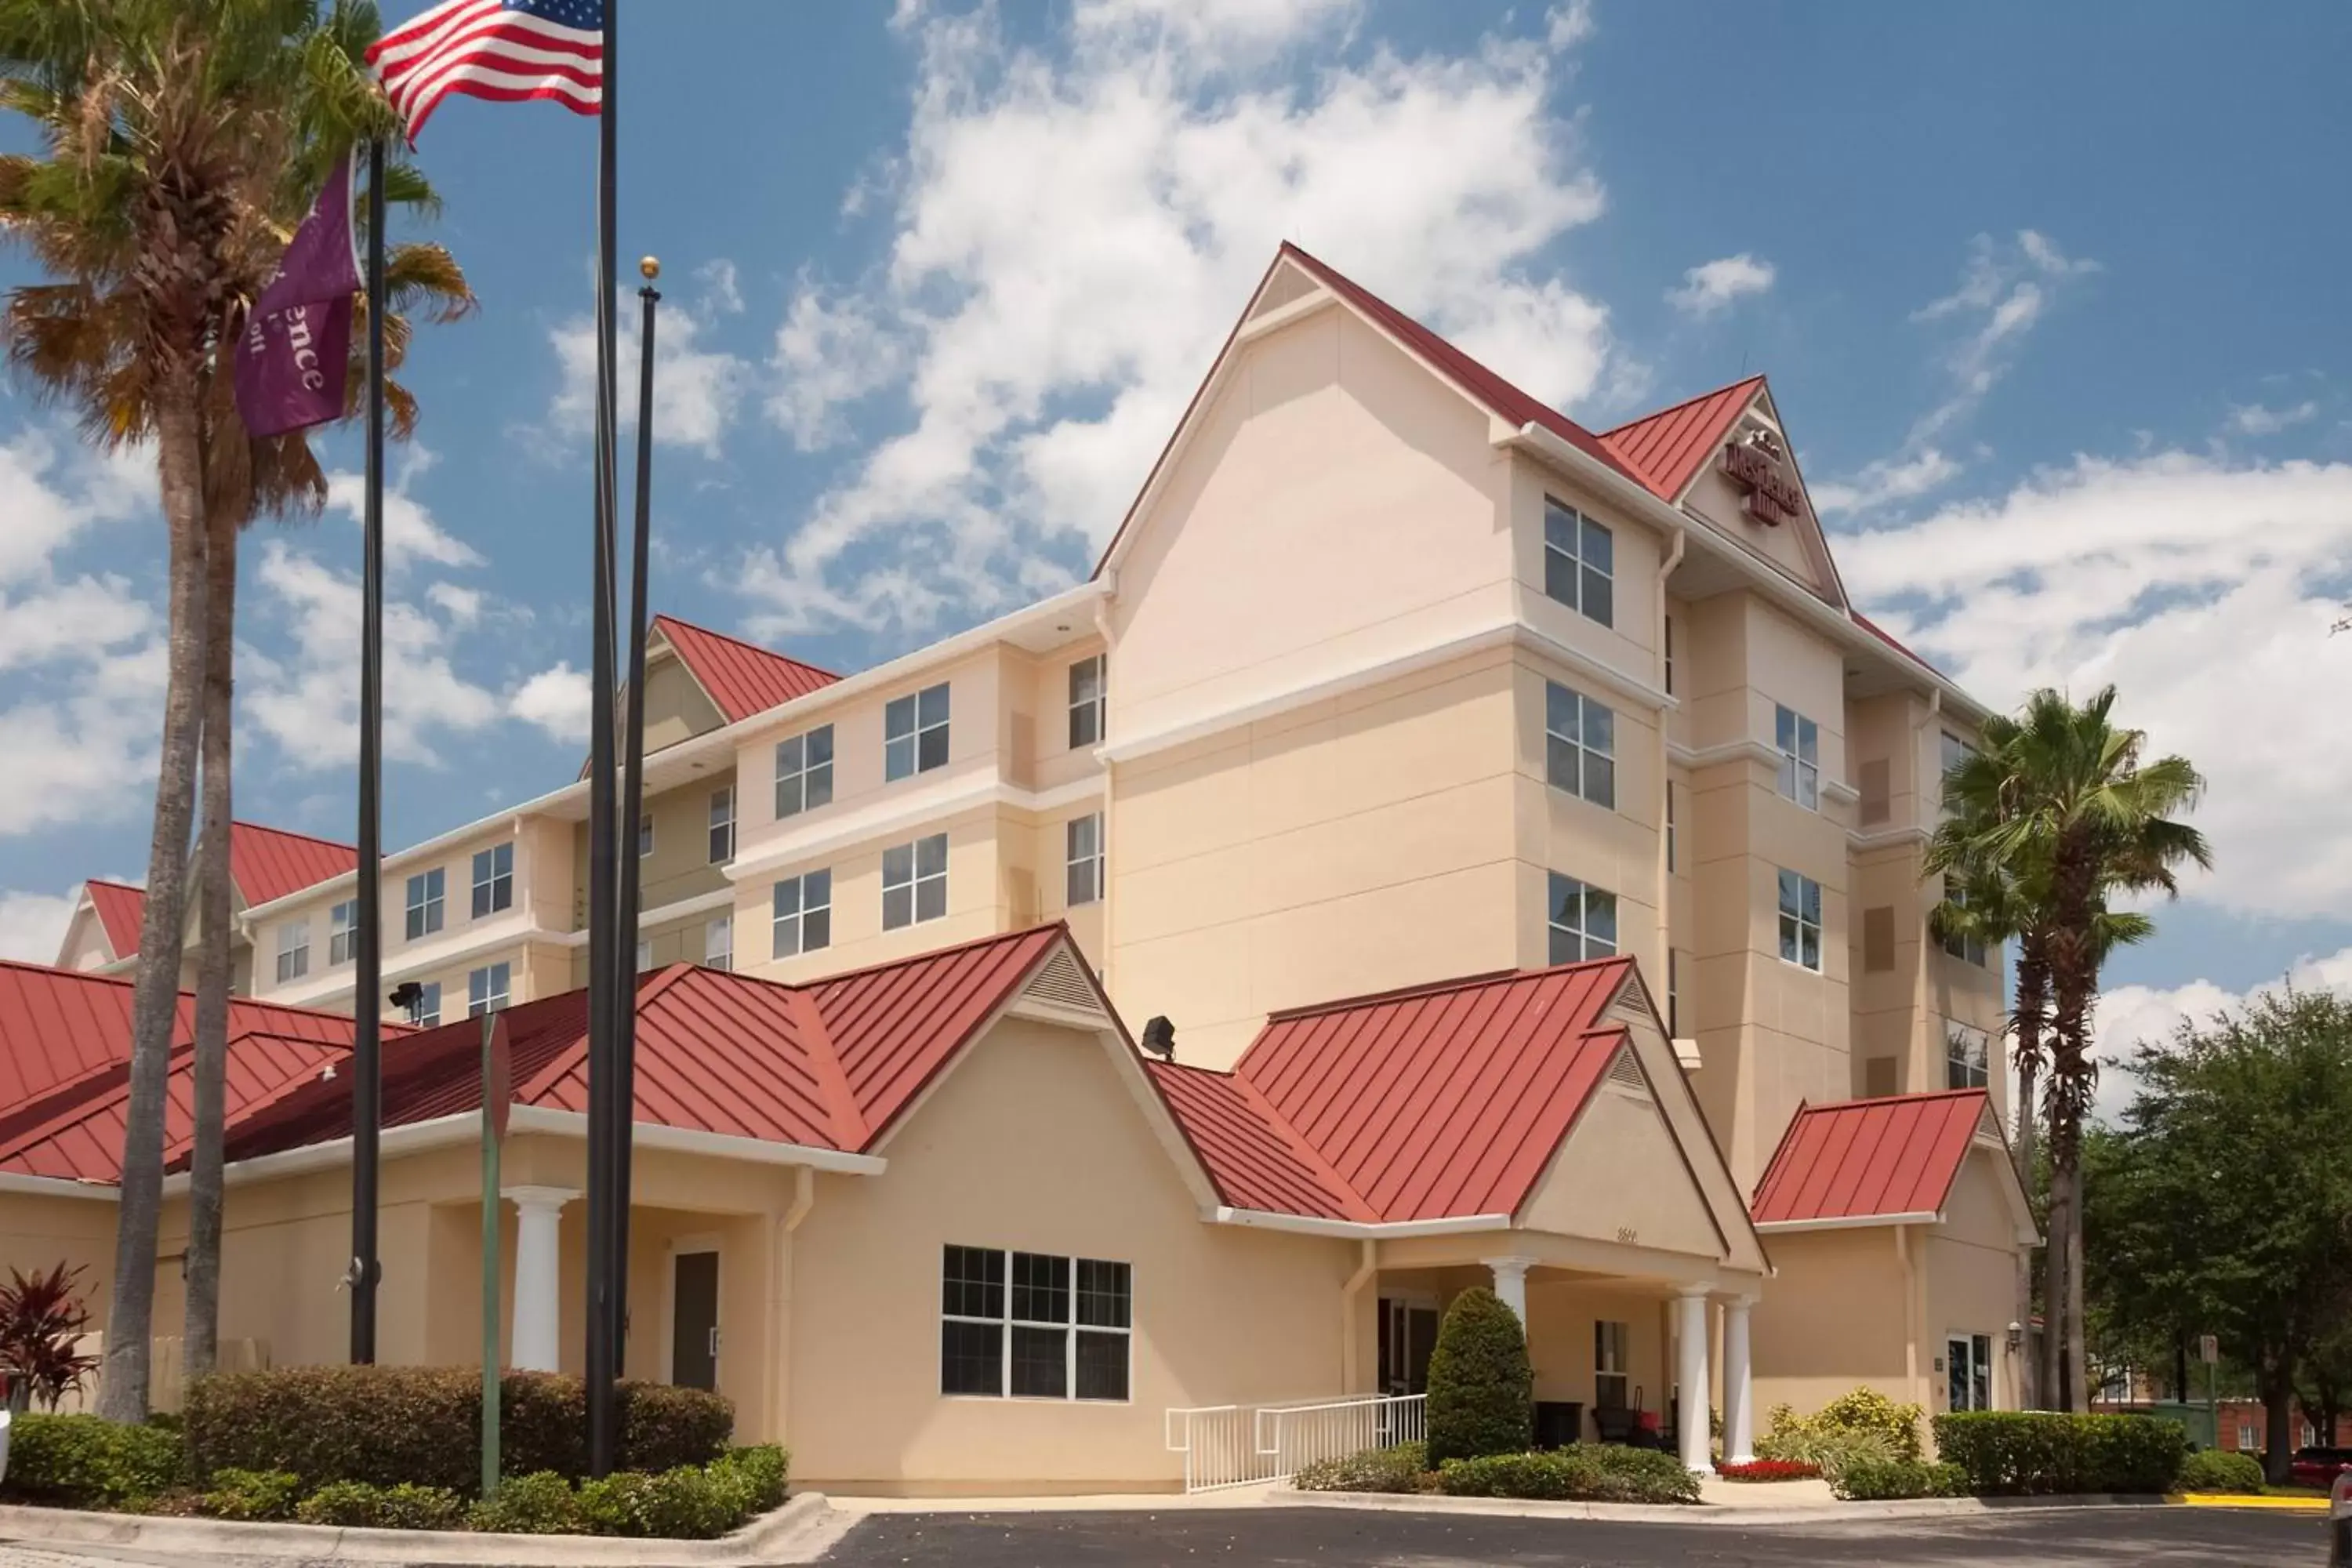 Property Building in Residence Inn Orlando Convention Center